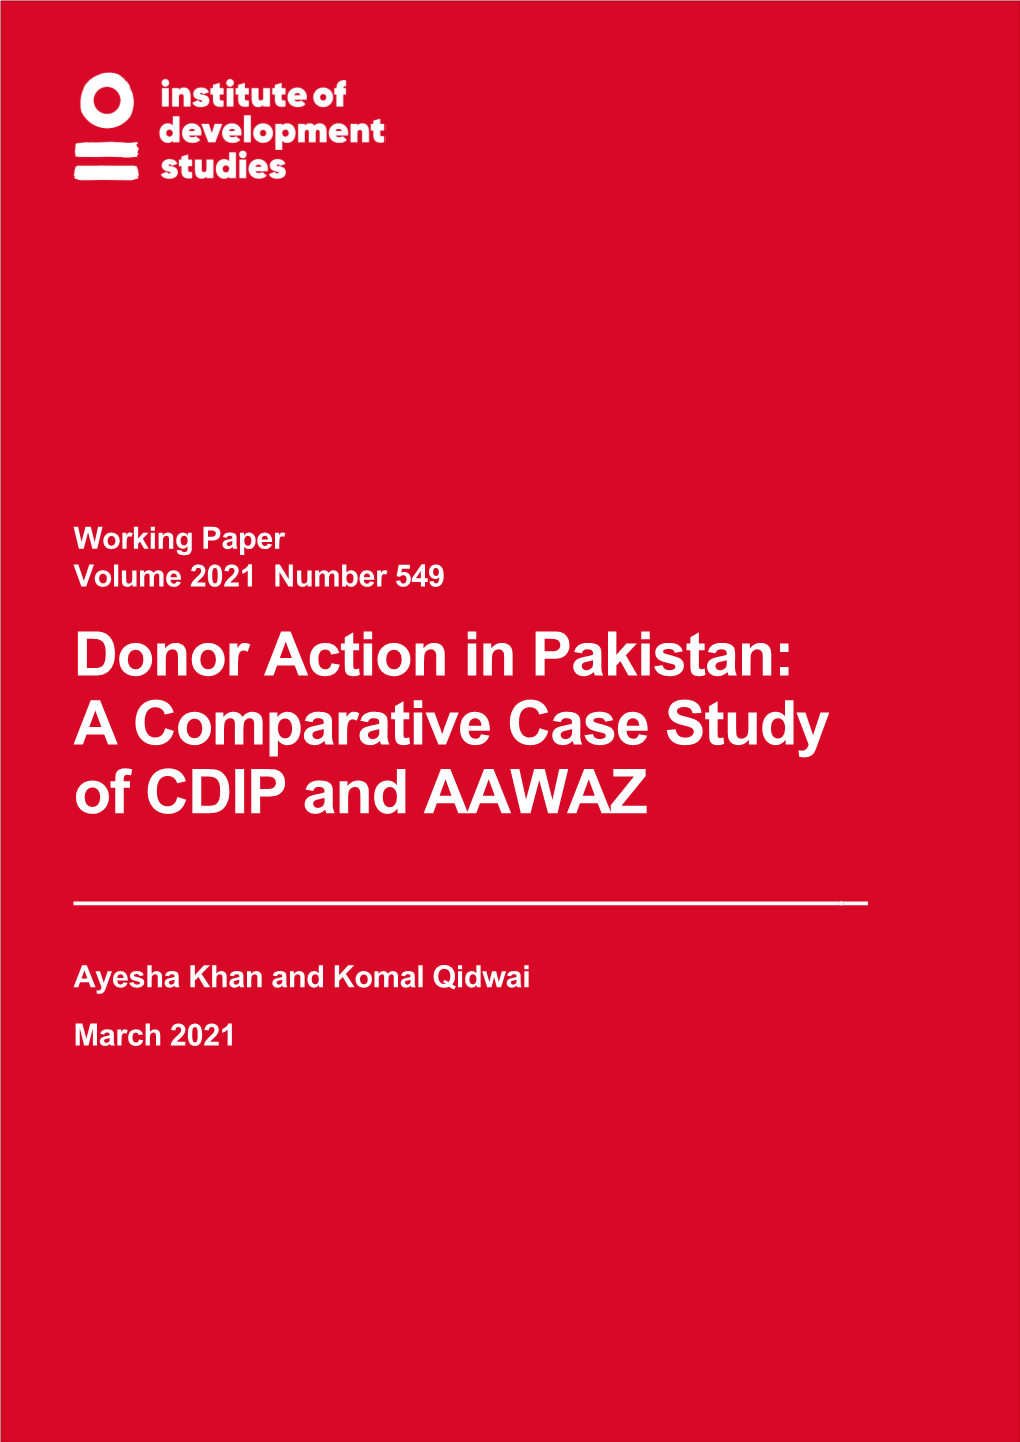 Donor Action in Pakistan: a Comparative Case Study of CDIP and AAWAZ